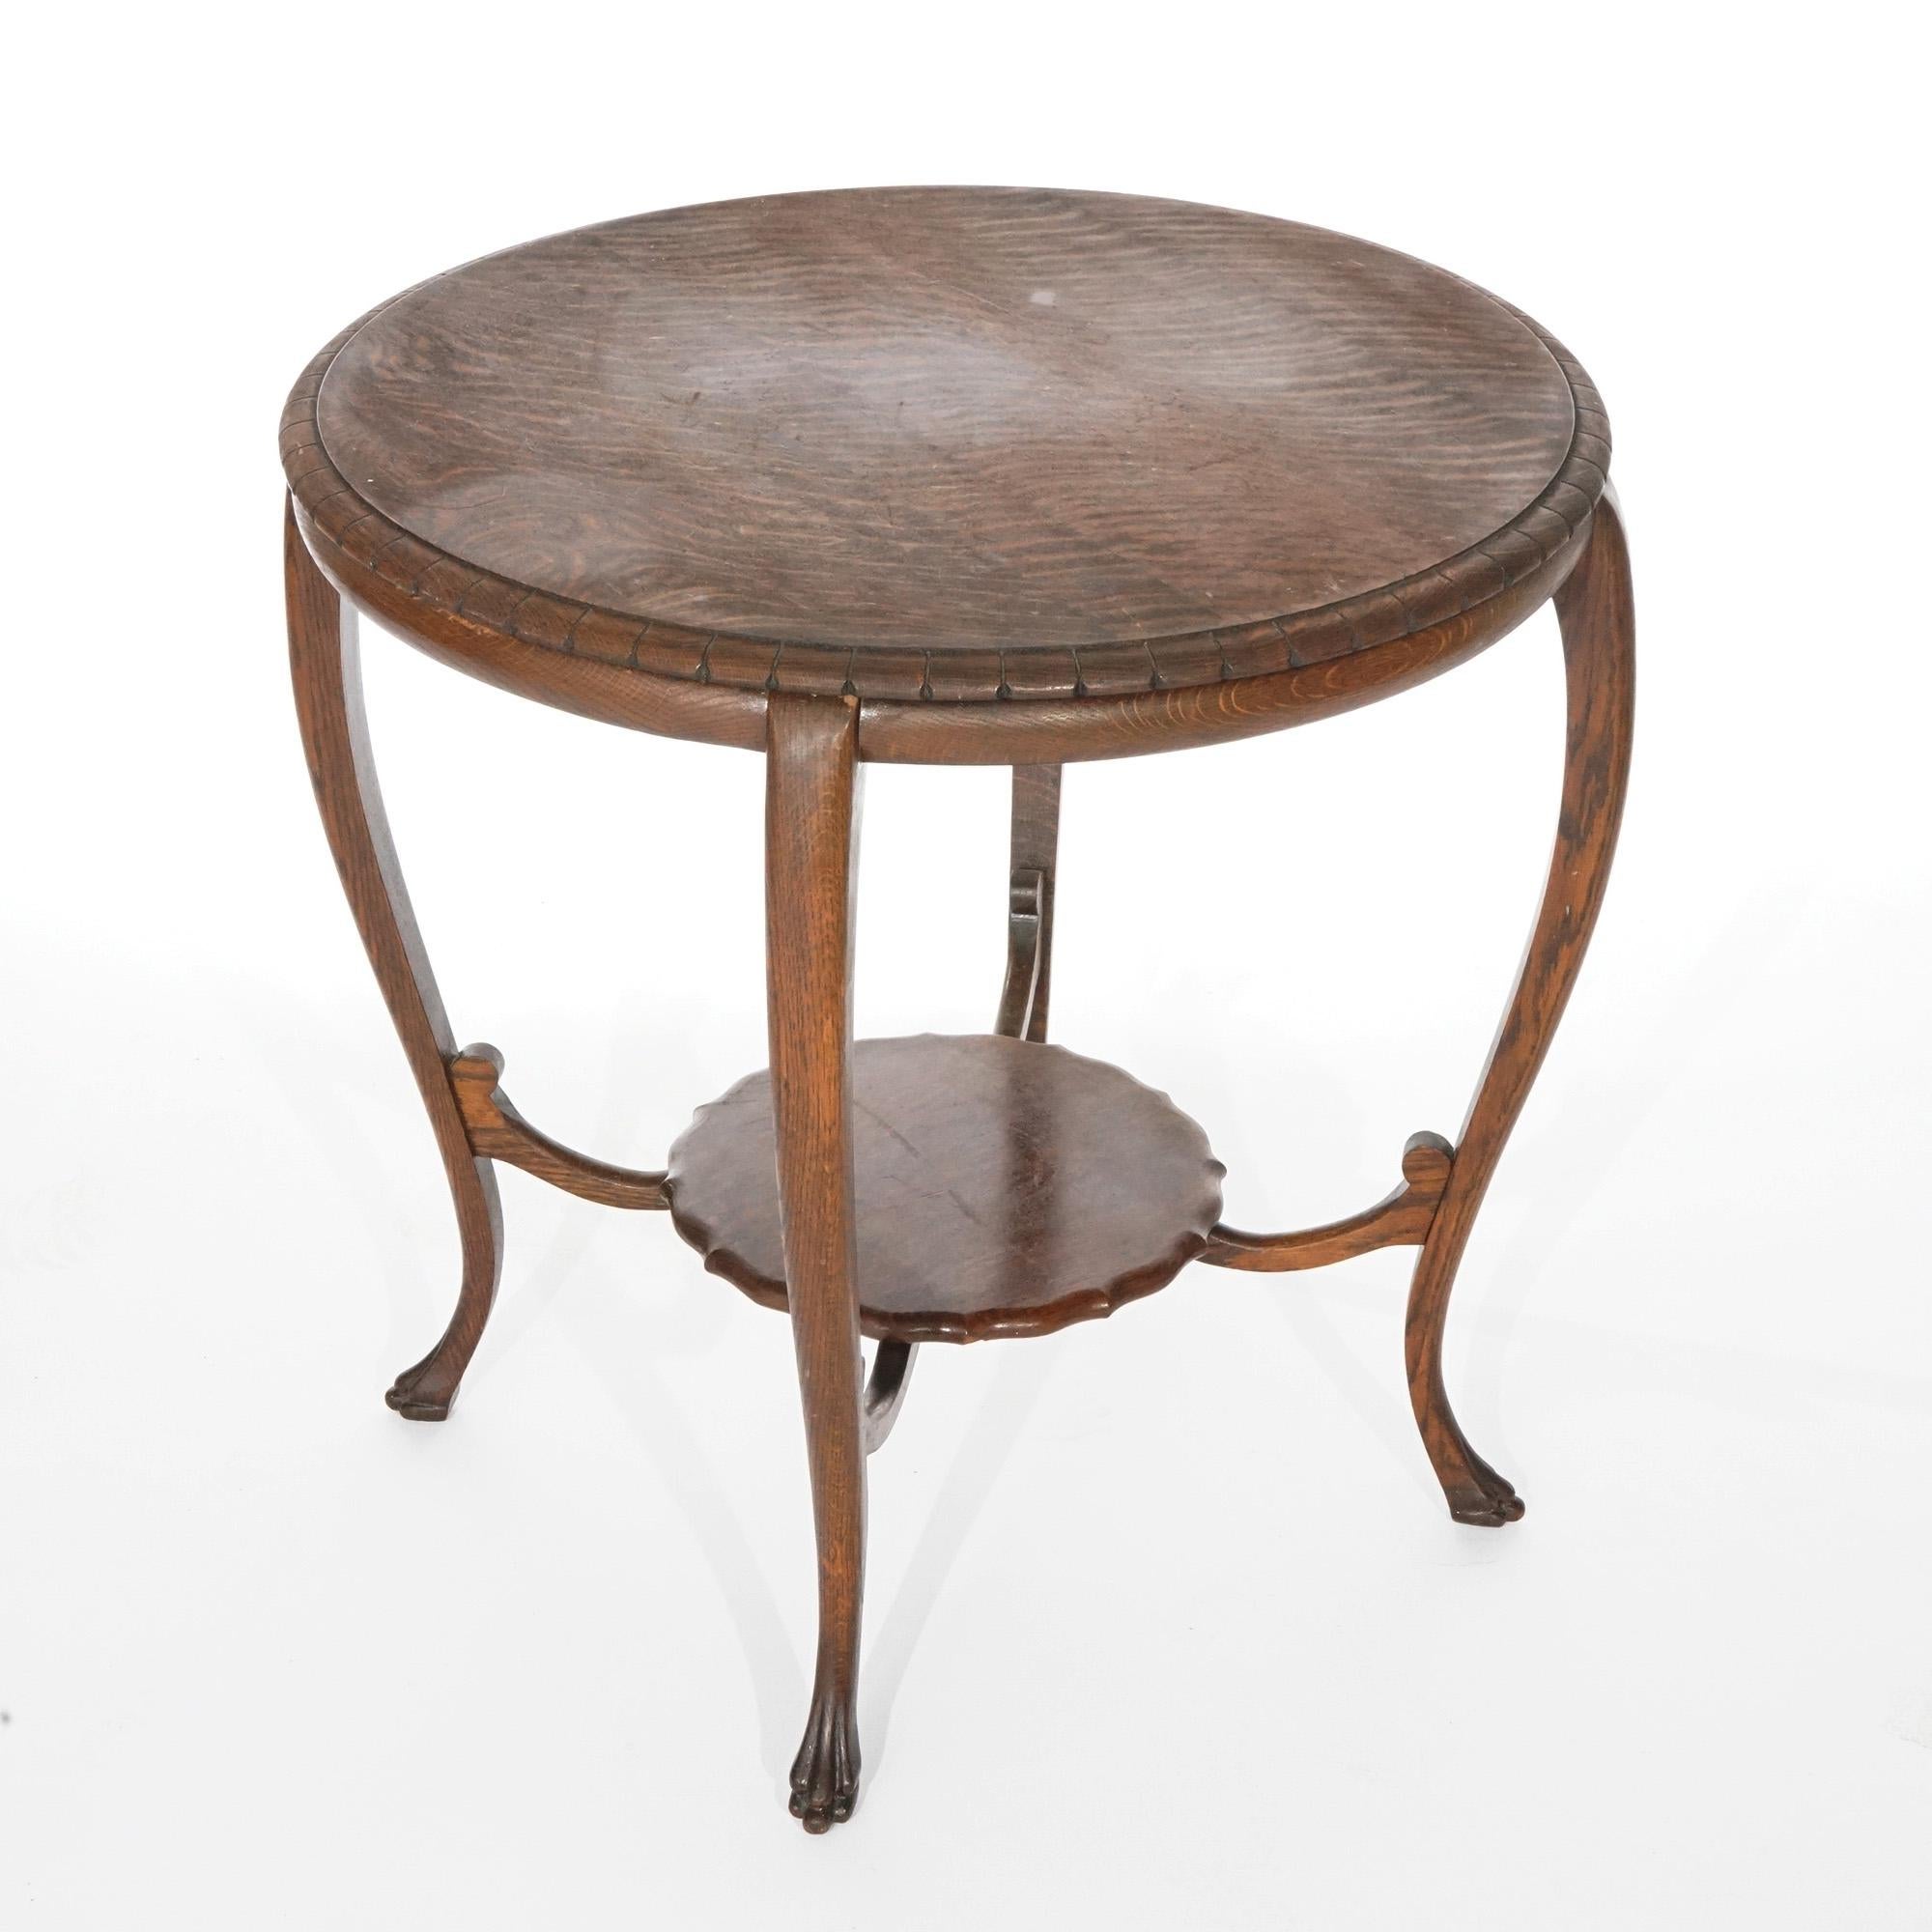 Antique Quartersawn Oak Parlor Table with Paw Feet, Circa 1900 For Sale 1